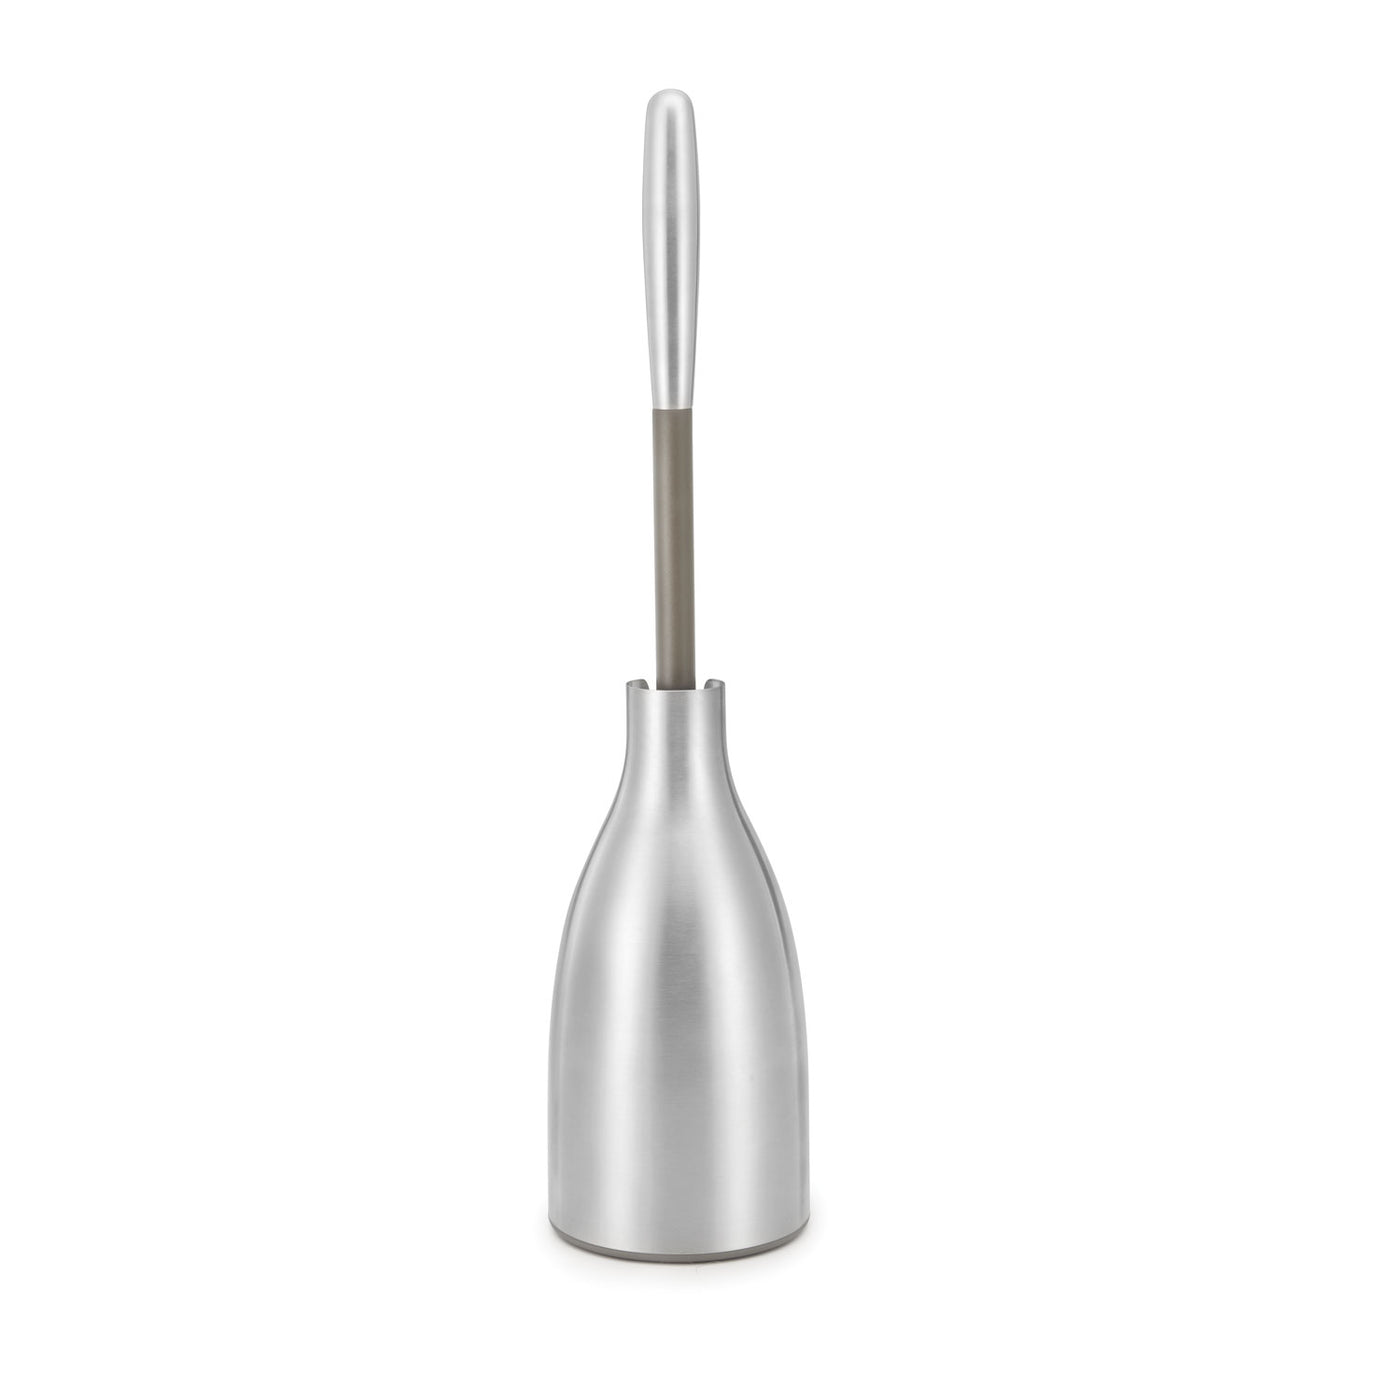 Stainless Steel Toilet Brush Caddy